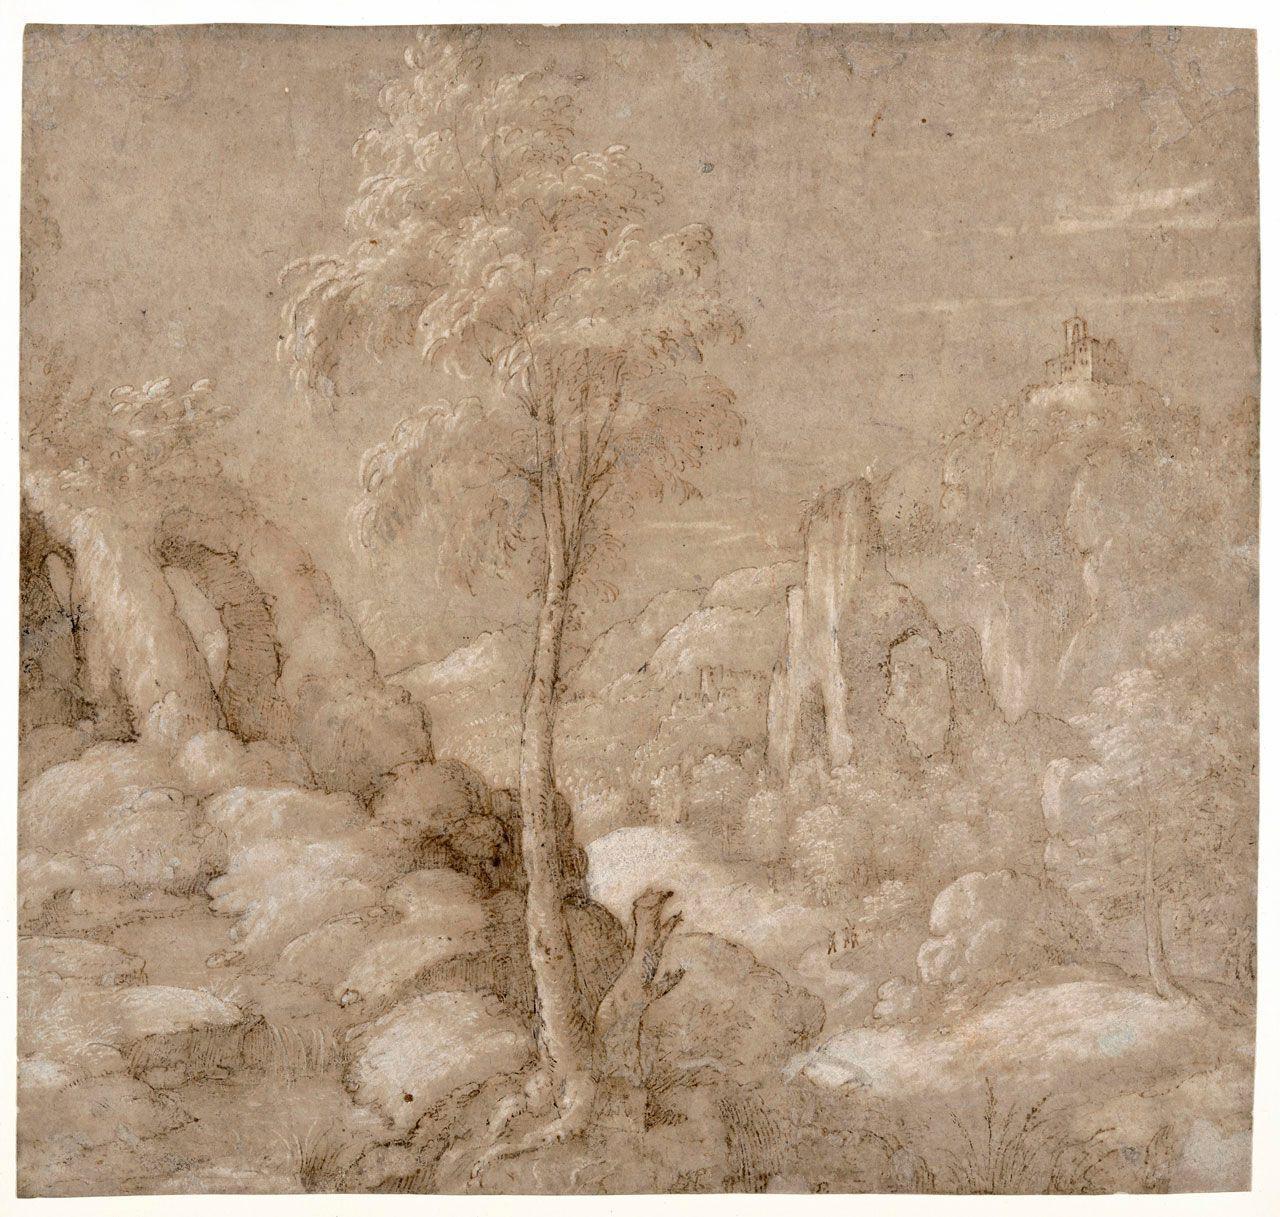 A Rocky Landscape with Trees